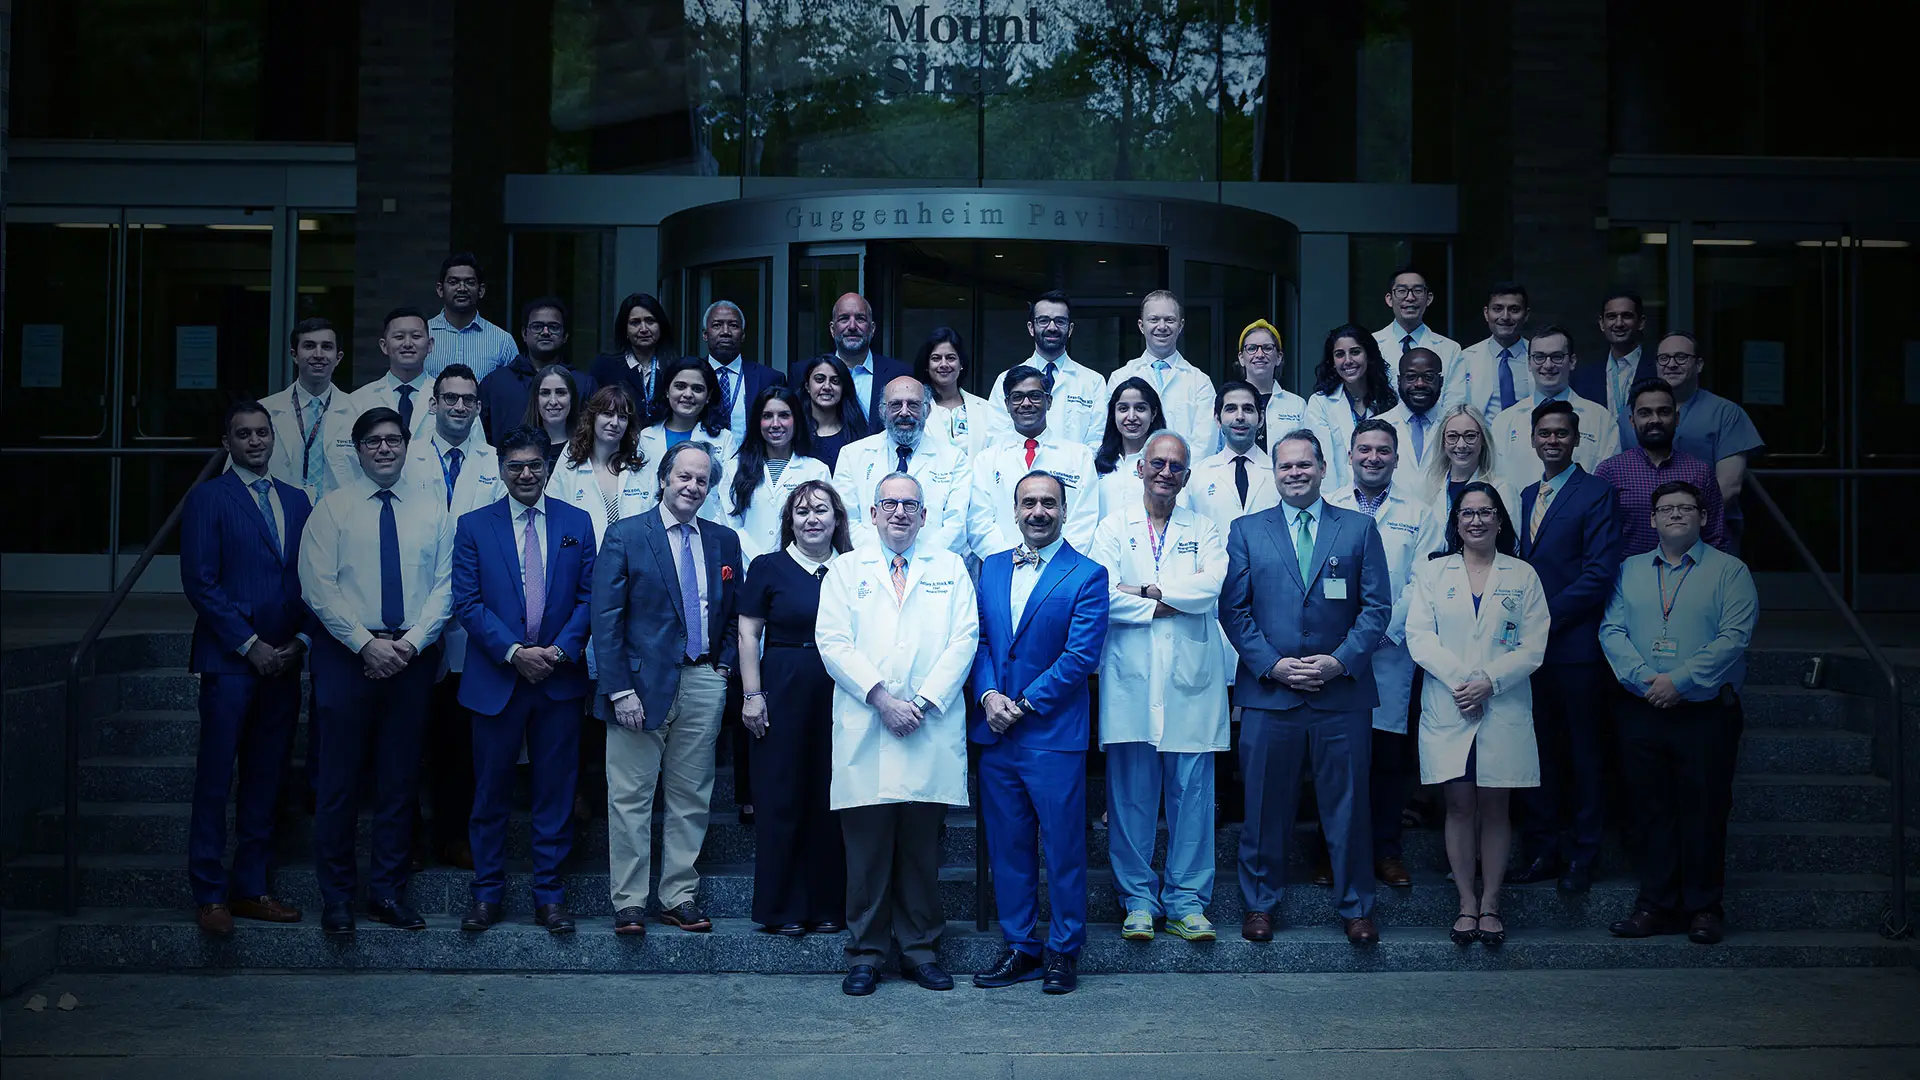 The Urology Residency Program at Mount Sinai: A Focus on Continuous Improvement